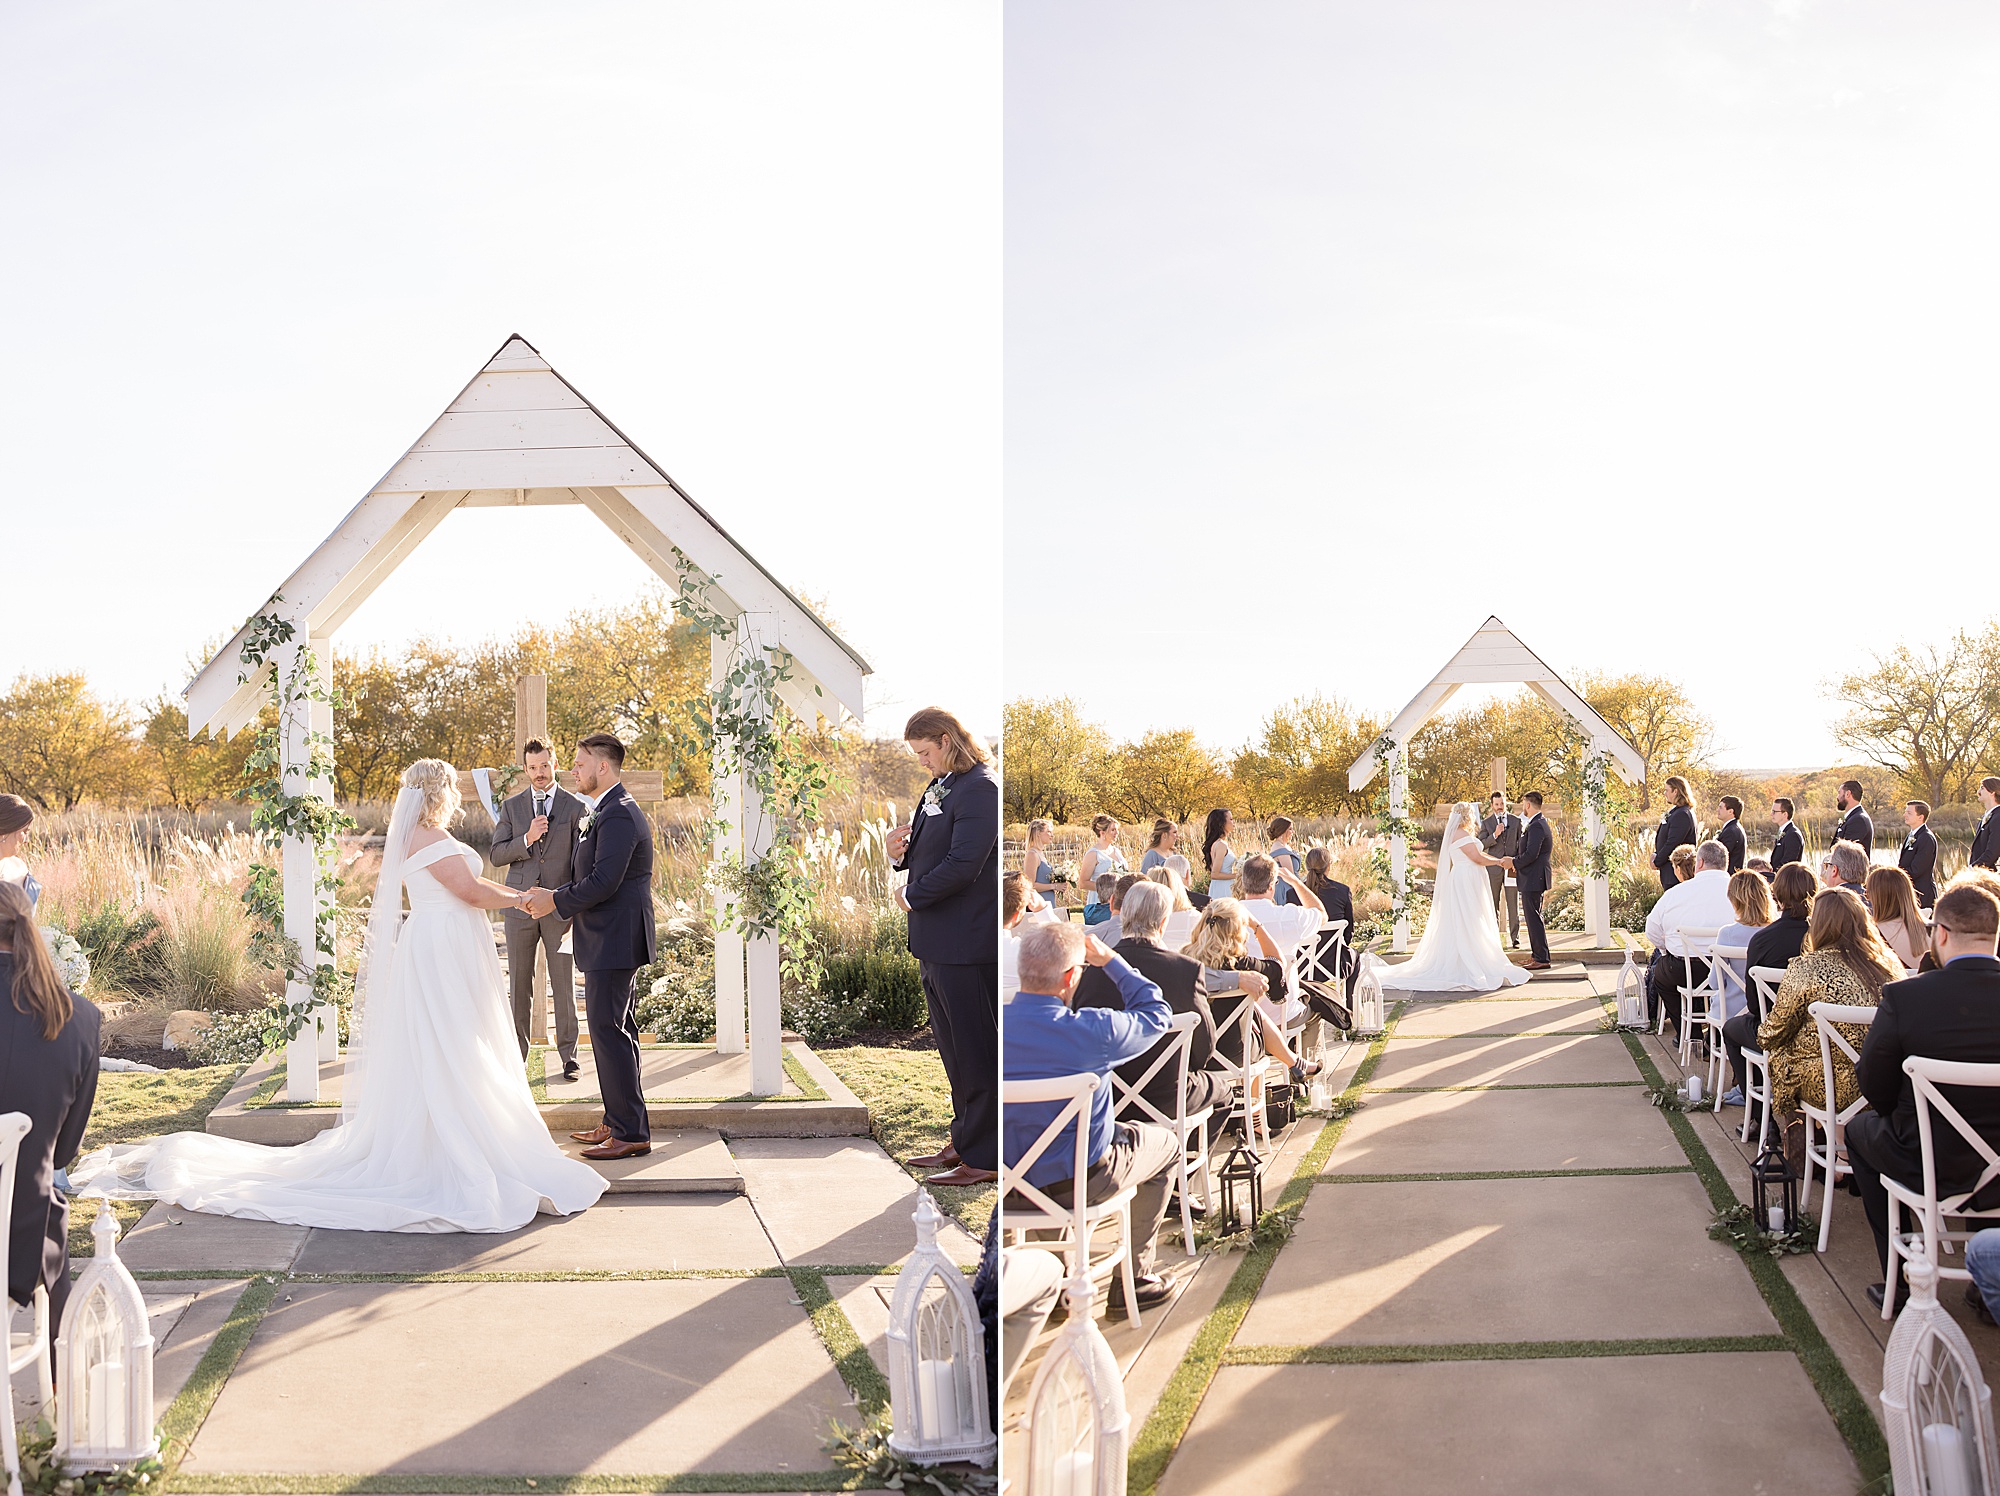 couple exchanges vows during outdoor wedding ceremony in Texas